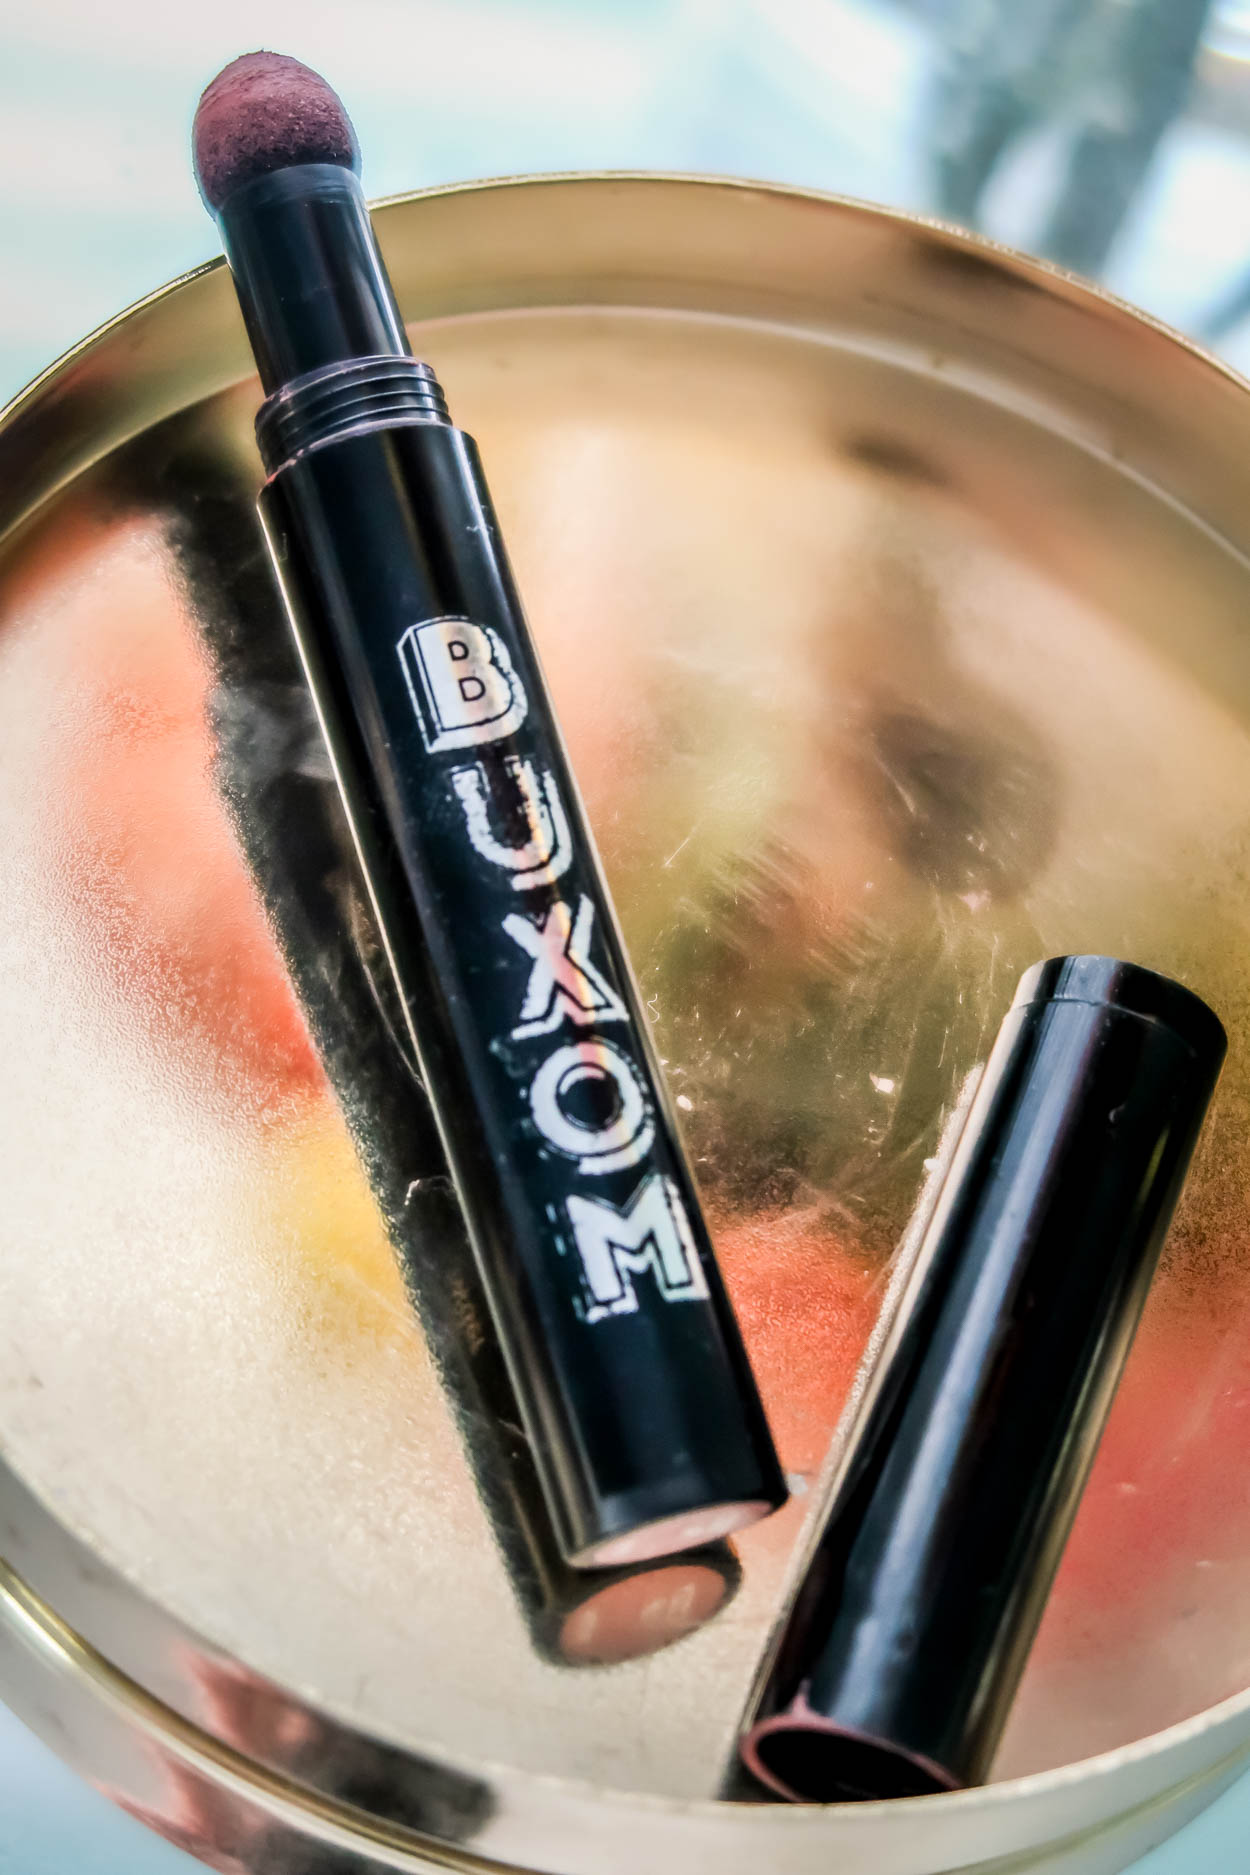 Favorite Makeup Products From Buxom Cosmetics that will help you achieve a gorgeous, but yet natural makeup look in no time! #beauty #makeup #buxomcosmetics #fallmakeup